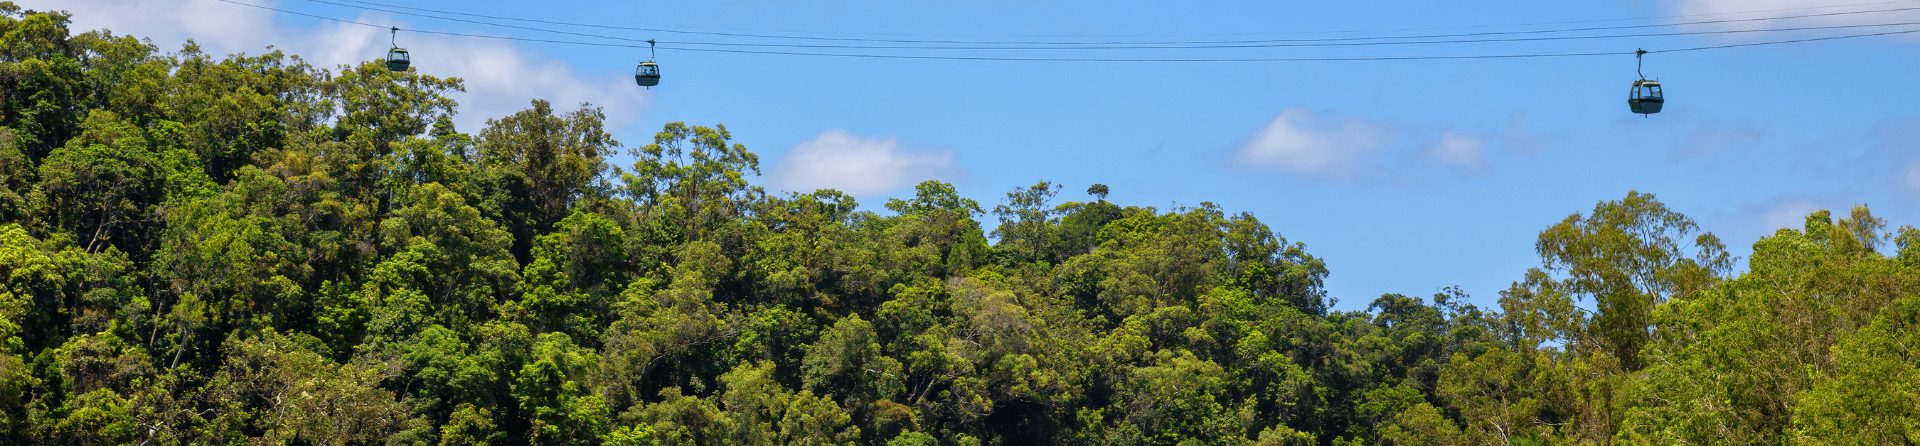 What can I see from the Kuranda Skyrail?